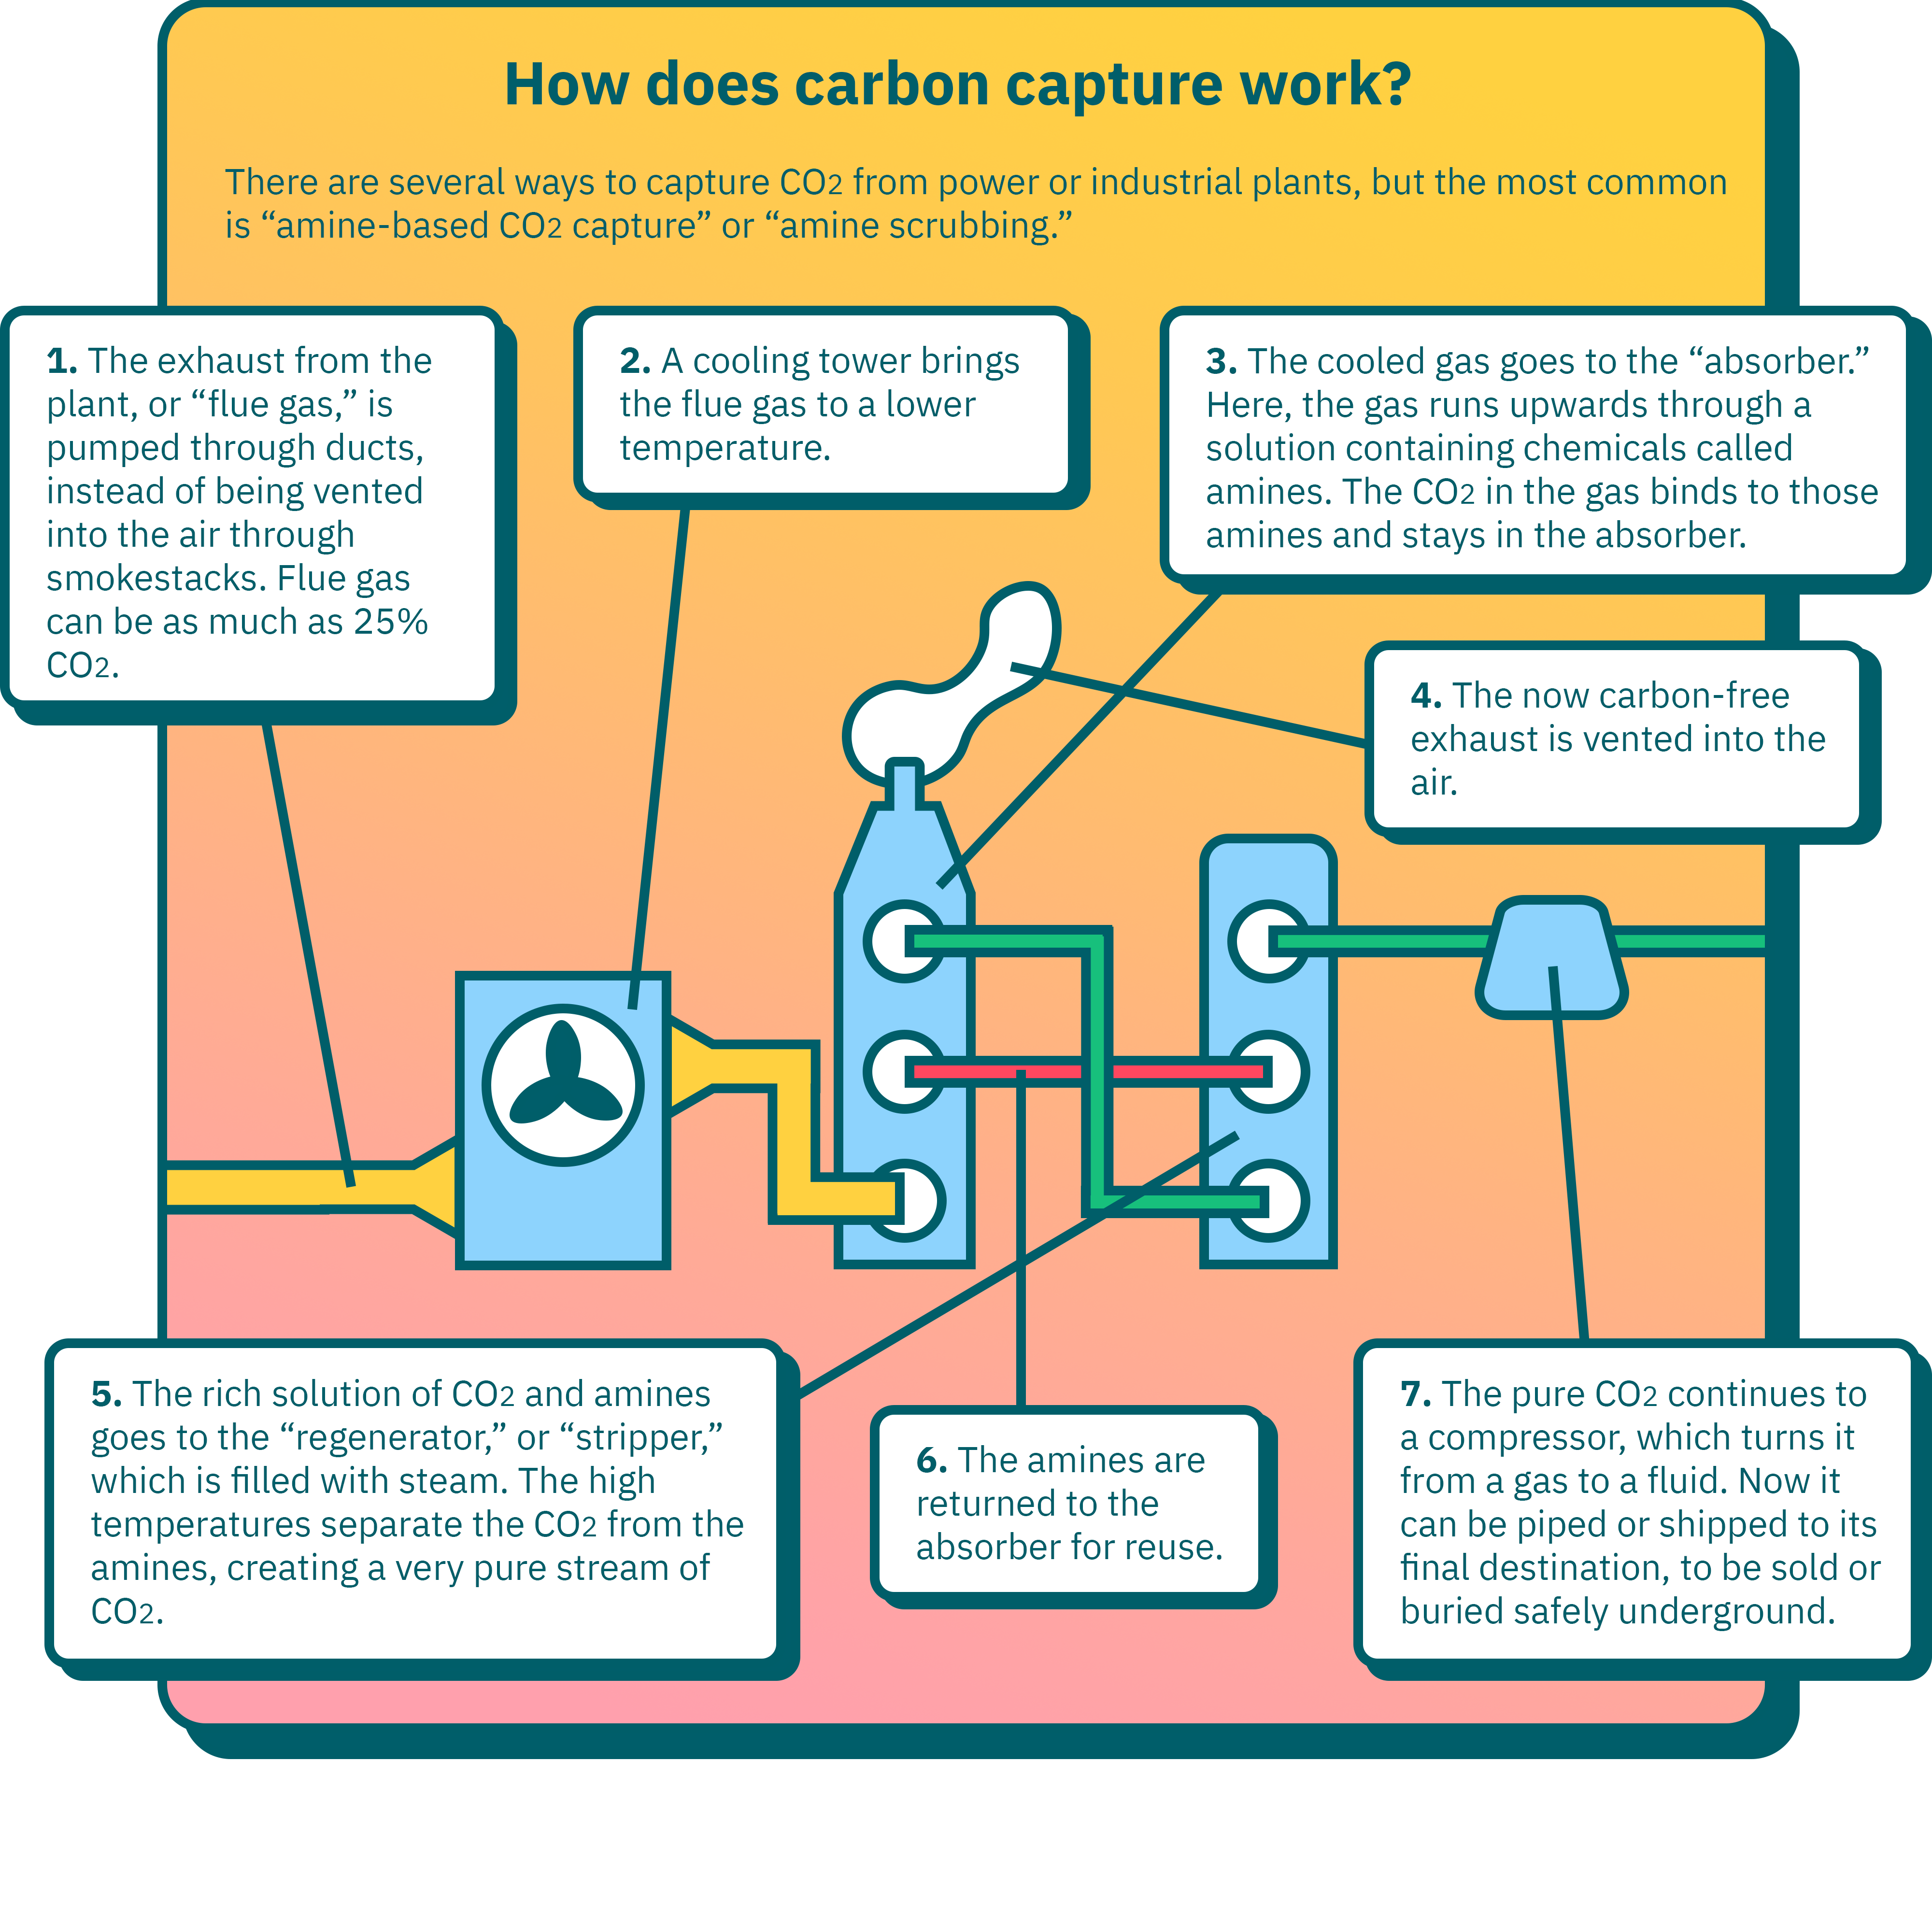 Infographic: How does carbon capture work? There are several ways to capture CO2 from power or industrial plants, but the most common is “amine-based CO2 capture” or “amine scrubbing.” 1. The exhaust from the plant, or “flue gas,” is pumped through ducts, instead of being vented into the air through smokestacks. Flue gas can be as much as 25% CO2. 2. A cooling tower brings the flue gas to a lower temperature. 3. The cooled gas goes to the “absorber.” Here, the gas runs upwards through a solution containing chemicals called amines. The CO2 in the gas binds to those amines and stays in the absorber. 4. The now carbon-free exhaust is vented into the air. 5. The rich solution of CO2 and amines goes to the “regenerator,” or “stripper,” which is filled with steam. The high temperatures separate the CO2 from the amines, creating a very pure stream of CO2. 6. The amines are returned to the absorber for reuse. 7. The pure CO2 continues to a compressor, which turns it from a gas to a fluid. Now it can be piped or shipped to its final destination, to be sold or buried safely underground.